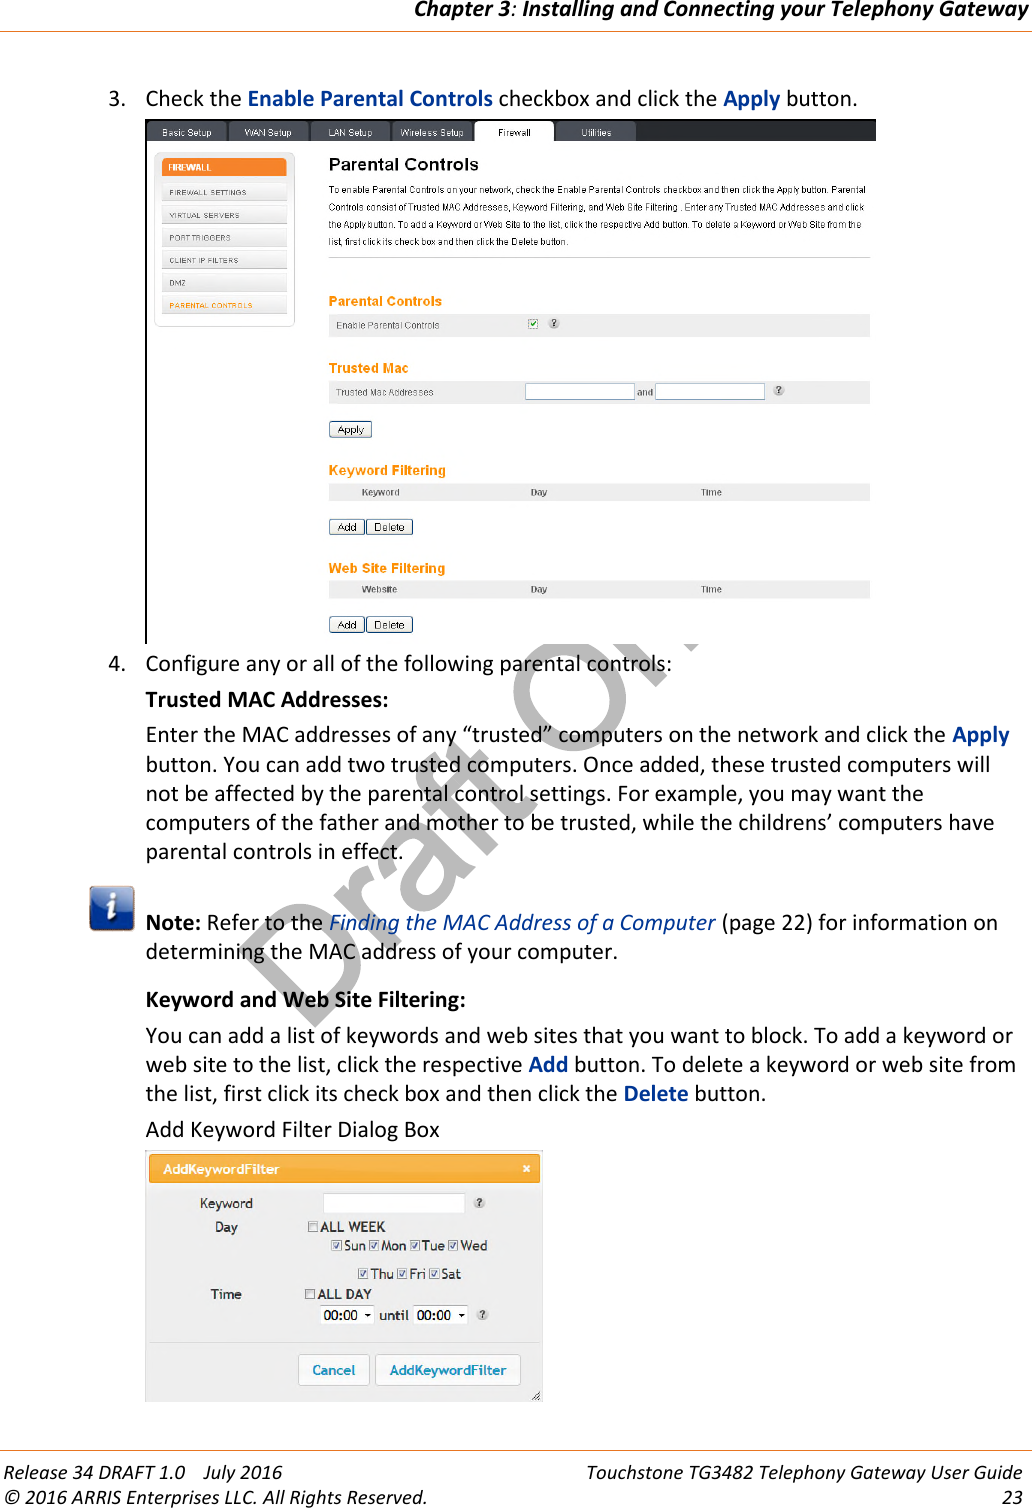 Draft OnlyChapter 3:Installing and Connecting your Telephony GatewayRelease 34 DRAFT 1.0 July 2016 Touchstone TG3482 Telephony Gateway User Guide© 2016 ARRIS Enterprises LLC. All Rights Reserved. 233. Check the Enable Parental Controls checkbox and click the Apply button.4. Configure any or all of the following parental controls:Trusted MAC Addresses:Enter the MAC addresses of any “trusted” computers on the network and click the Applybutton. You can add two trusted computers. Once added, these trusted computers willnot be affected by the parental control settings. For example, you may want thecomputers of the father and mother to be trusted, while the childrens’ computers haveparental controls in effect.Note: Refer to the Finding the MAC Address of a Computer (page 22) for information ondetermining the MAC address of your computer.Keyword and Web Site Filtering:You can add a list of keywords and web sites that you want to block. To add a keyword orweb site to the list, click the respective Add button. To delete a keyword or web site fromthe list, first click its check box and then click the Delete button.Add Keyword Filter Dialog Box